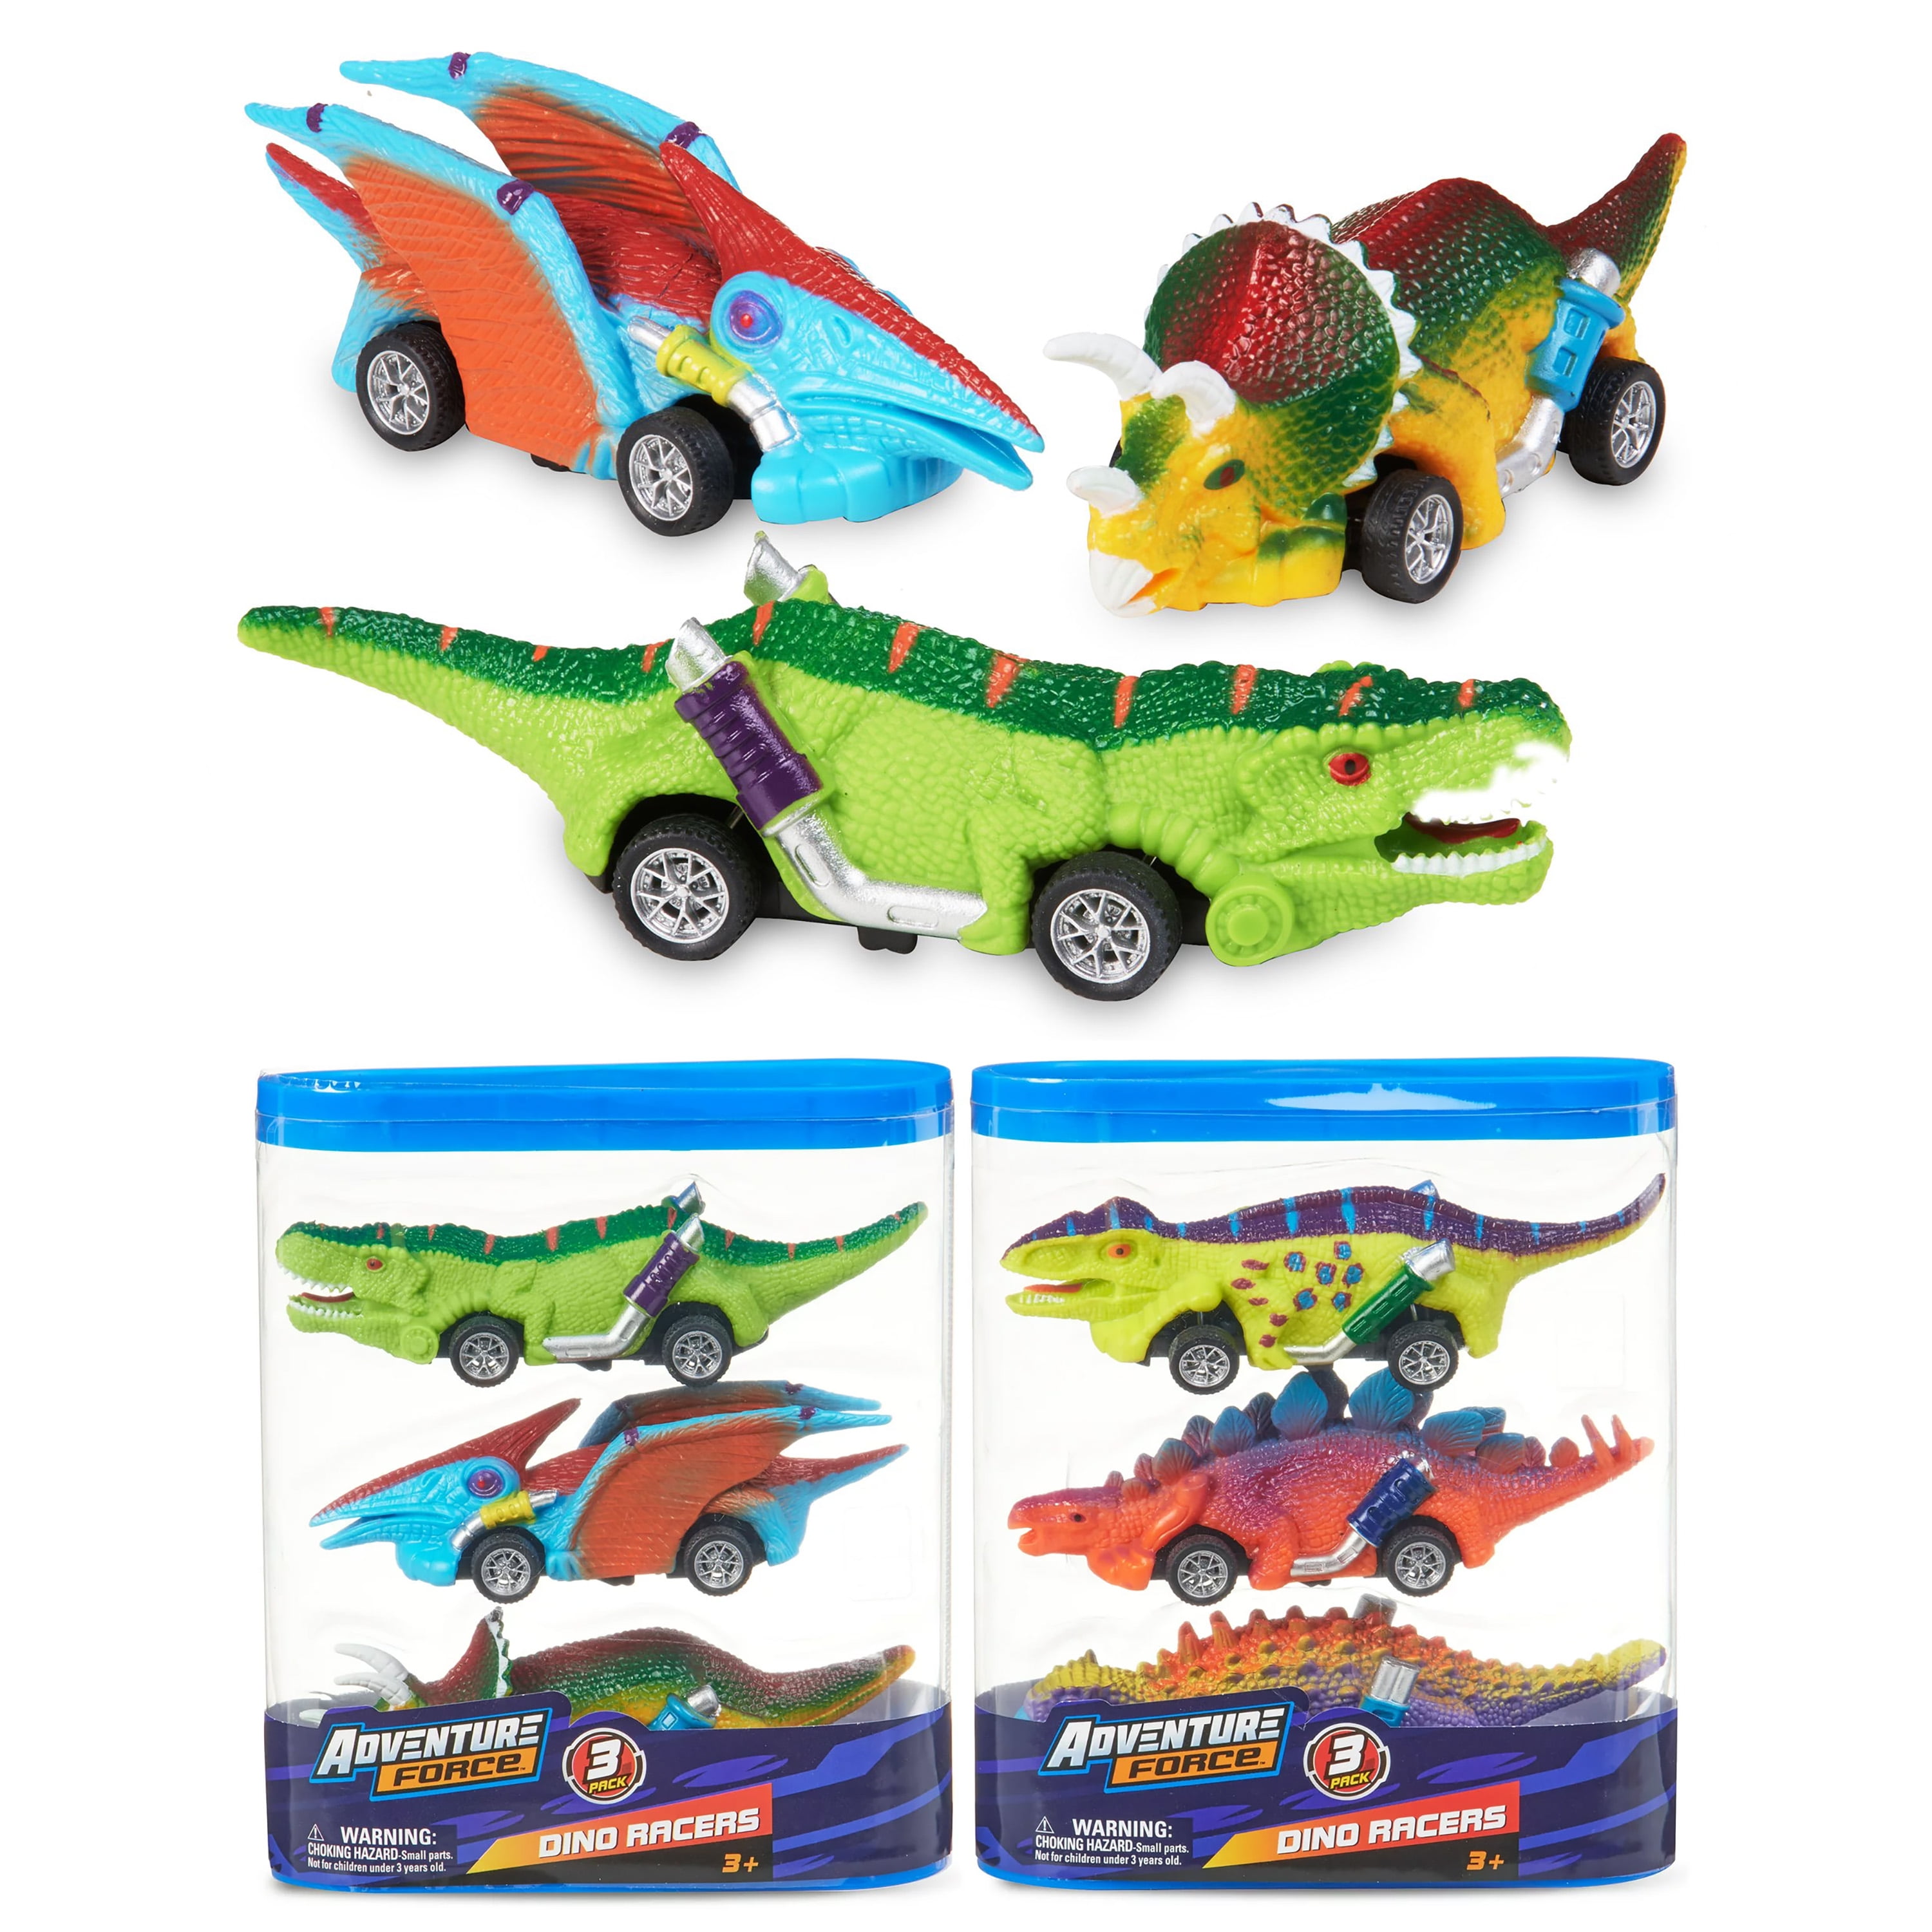 Adventure Force 3-Pack Dino Racers Vehicles - Amazing Toy for Kids and Children - Styles May Vary (Pack of 3 Vehicles)